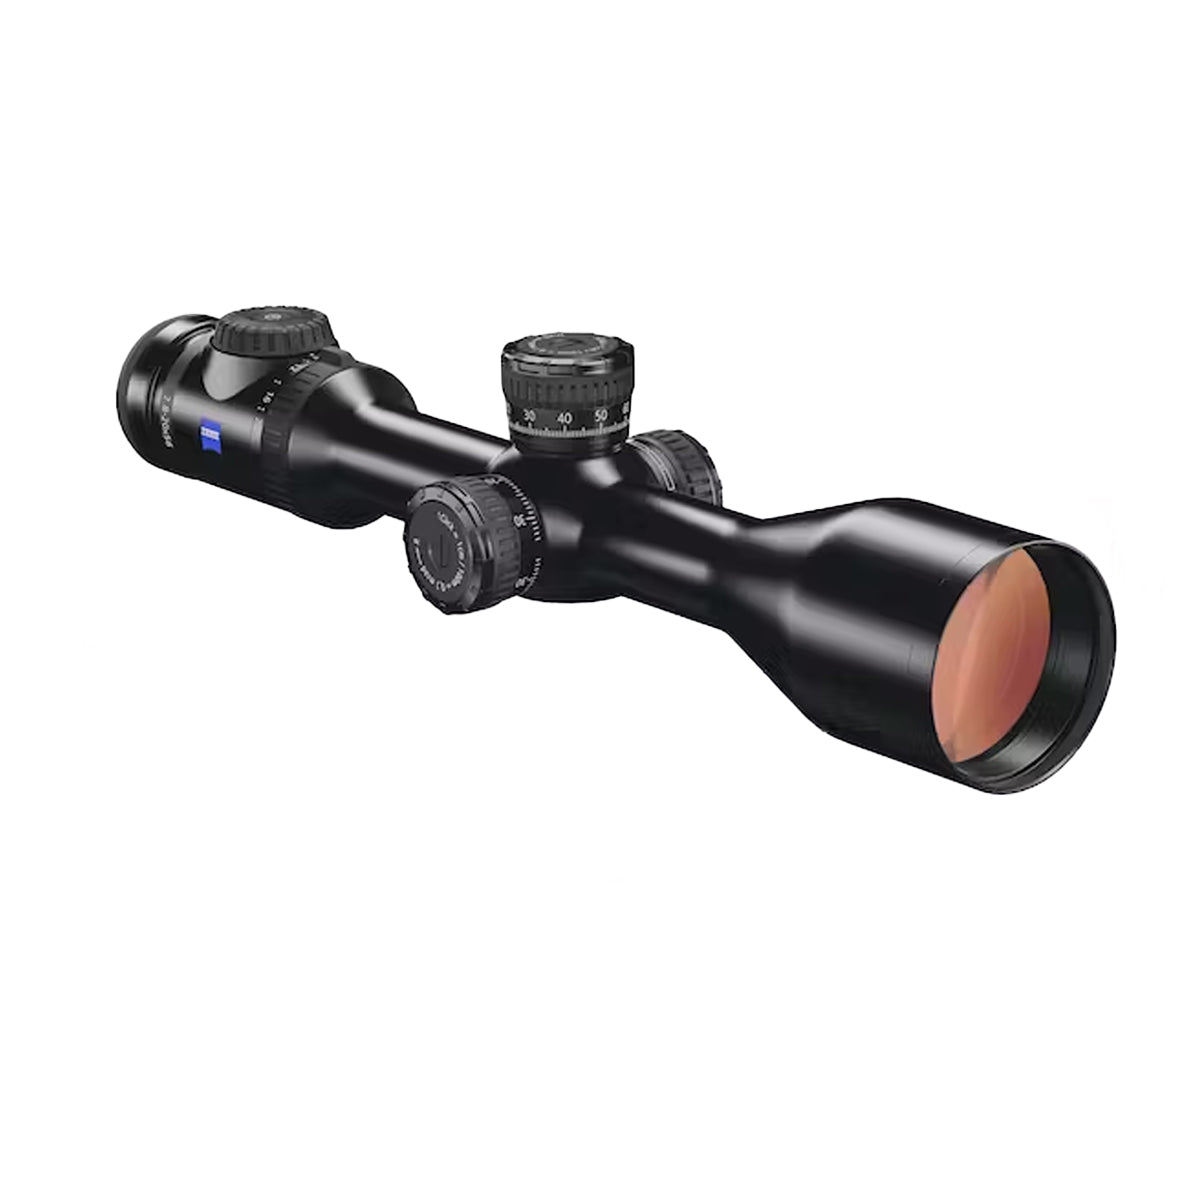 Zeiss V8 2.8-20x56 w/ Illuminated Plex Reticle #60 Riflescope in  by GOHUNT | Zeiss - GOHUNT Shop